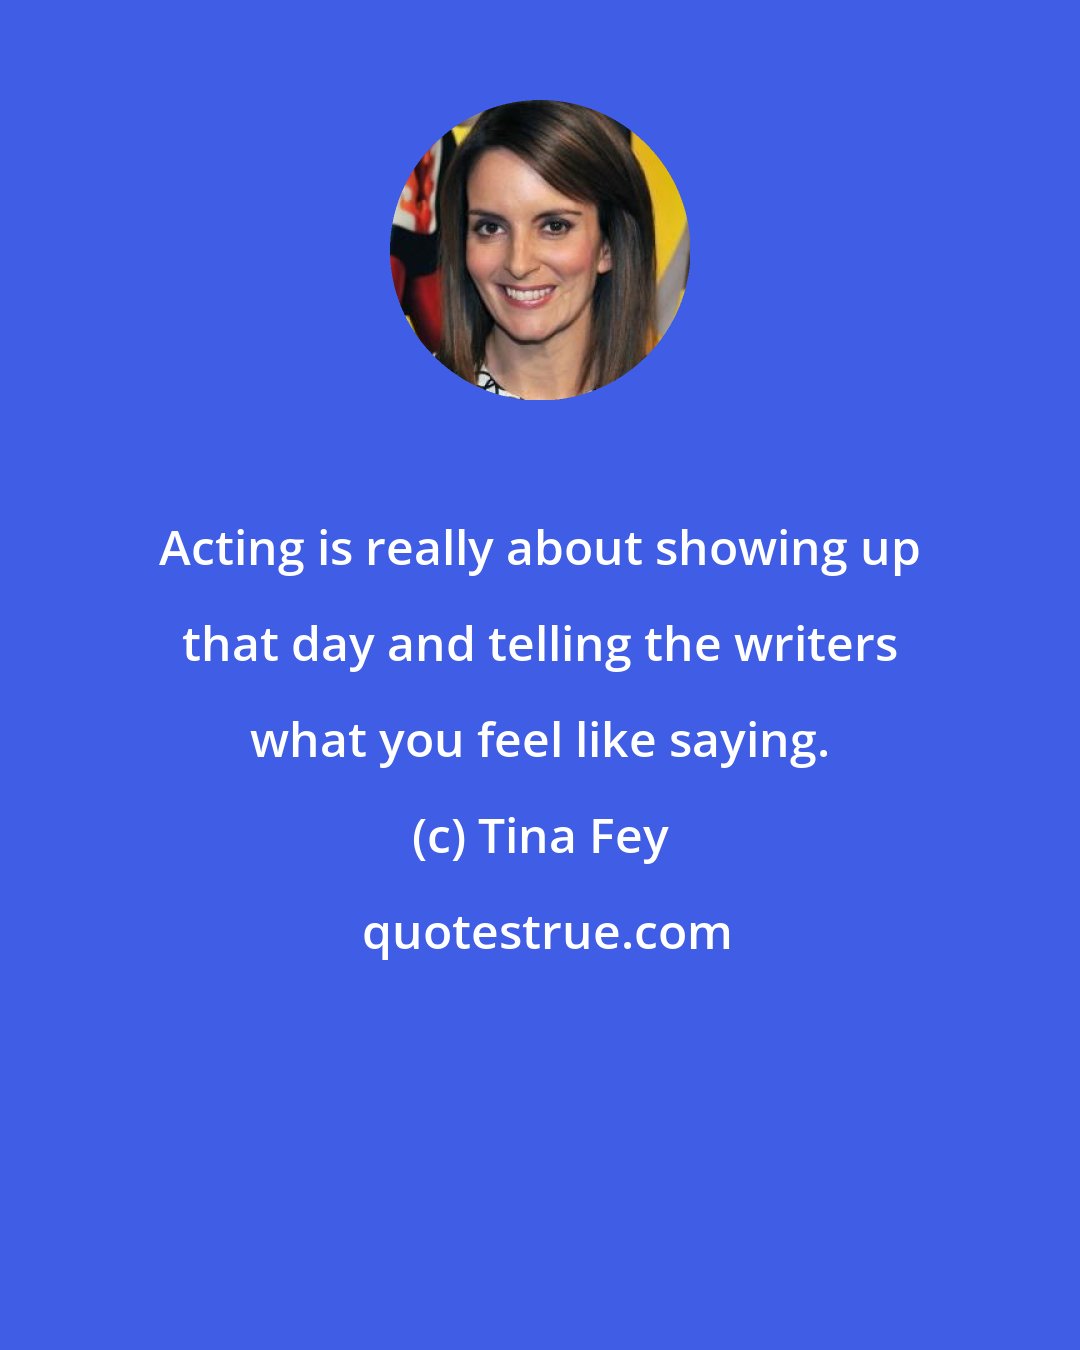 Tina Fey: Acting is really about showing up that day and telling the writers what you feel like saying.